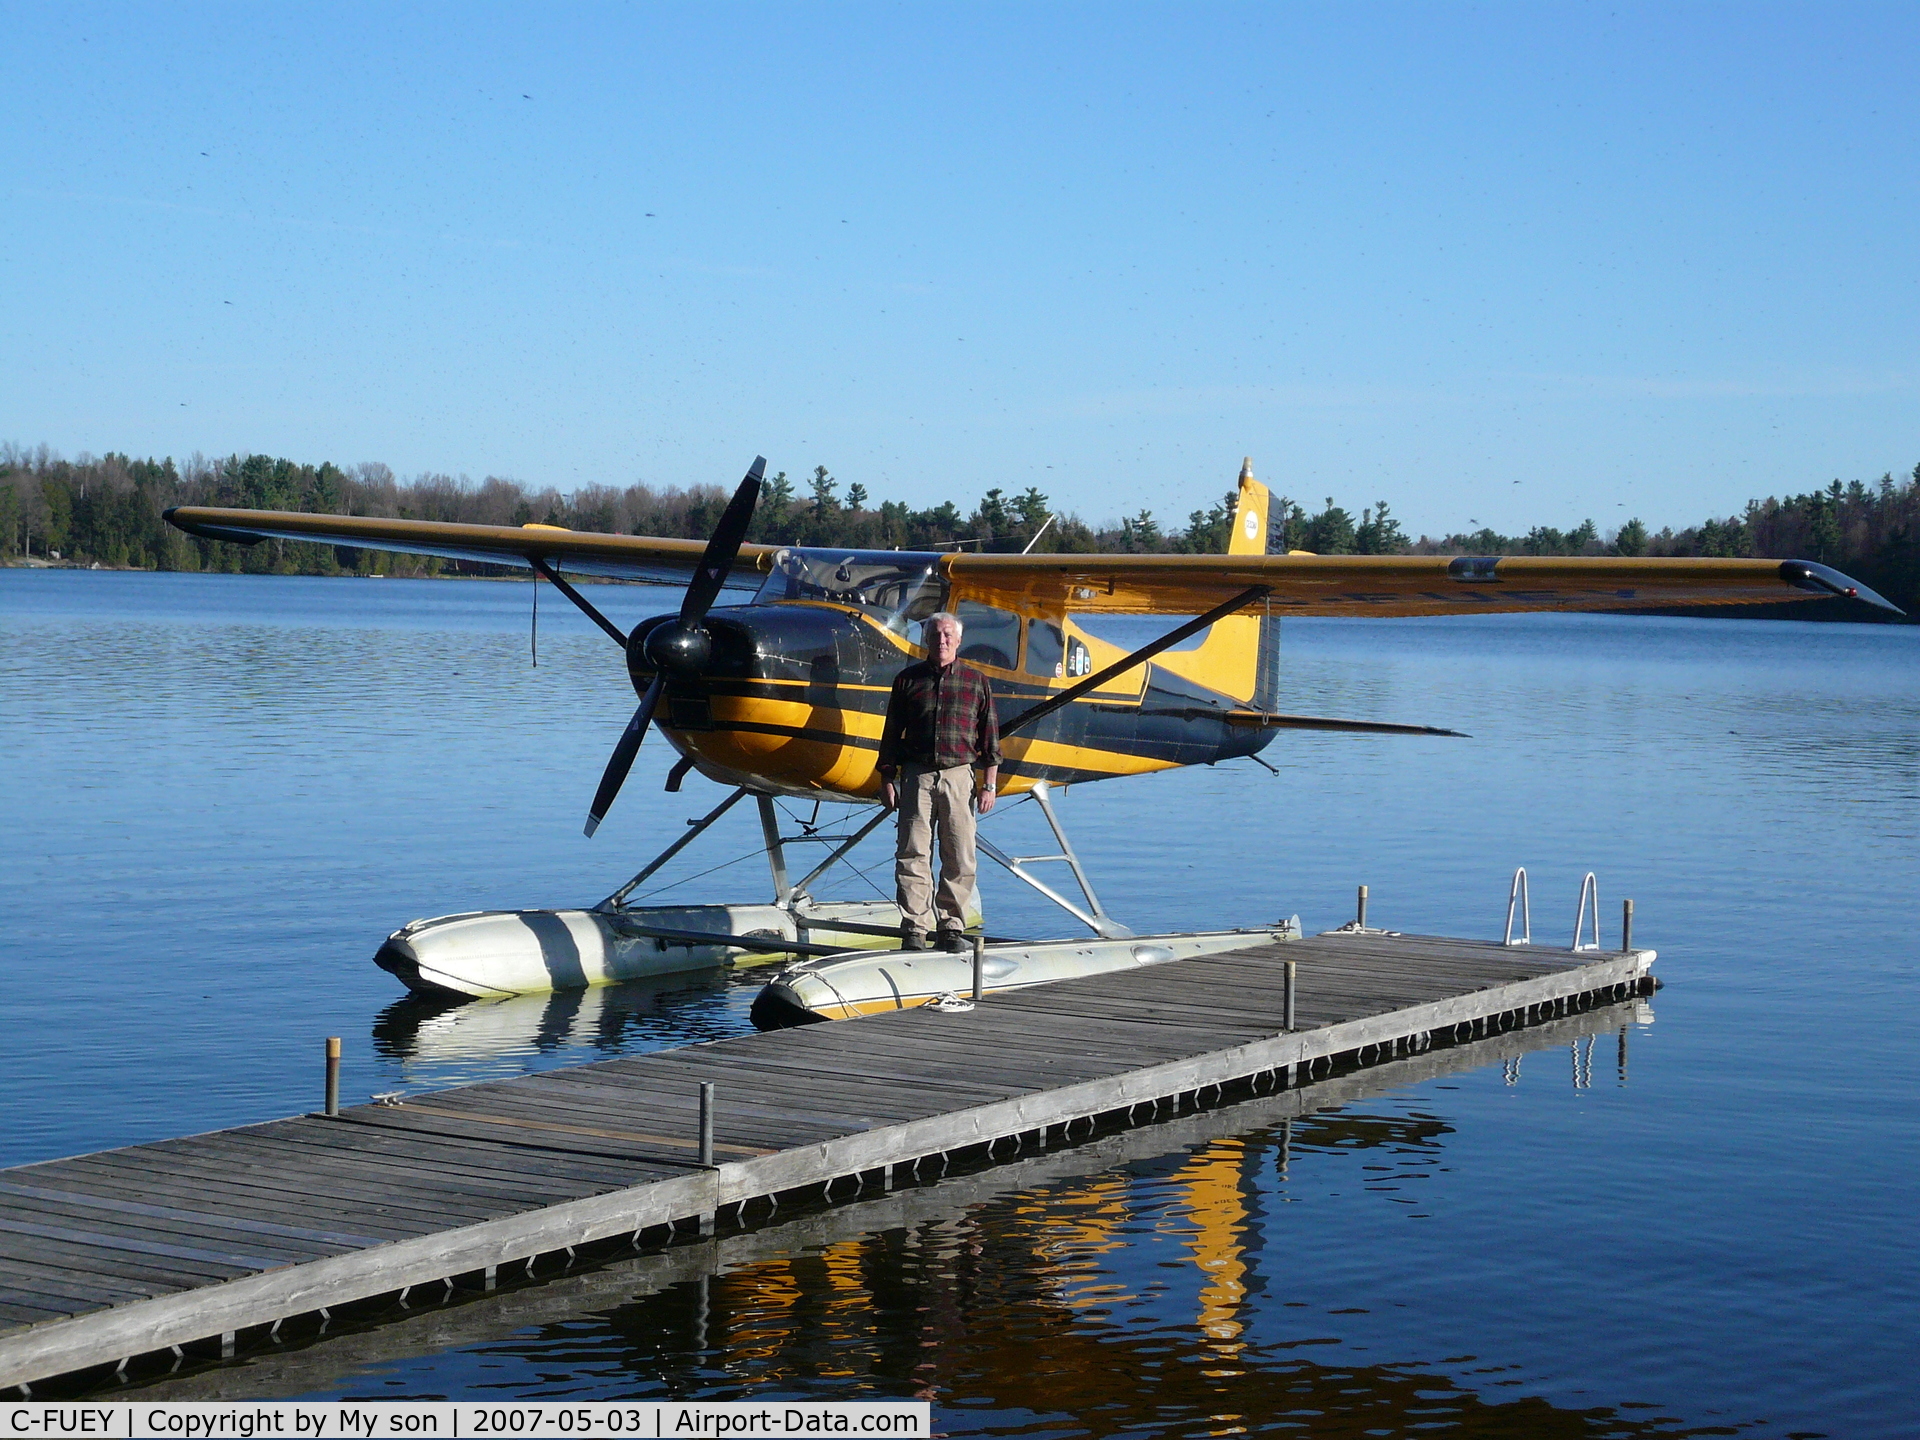 C-FUEY, 1966 Cessna 180H Skywagon C/N 18051668, FUEY at the cottage on Grippon Lake , Ontario, Canada